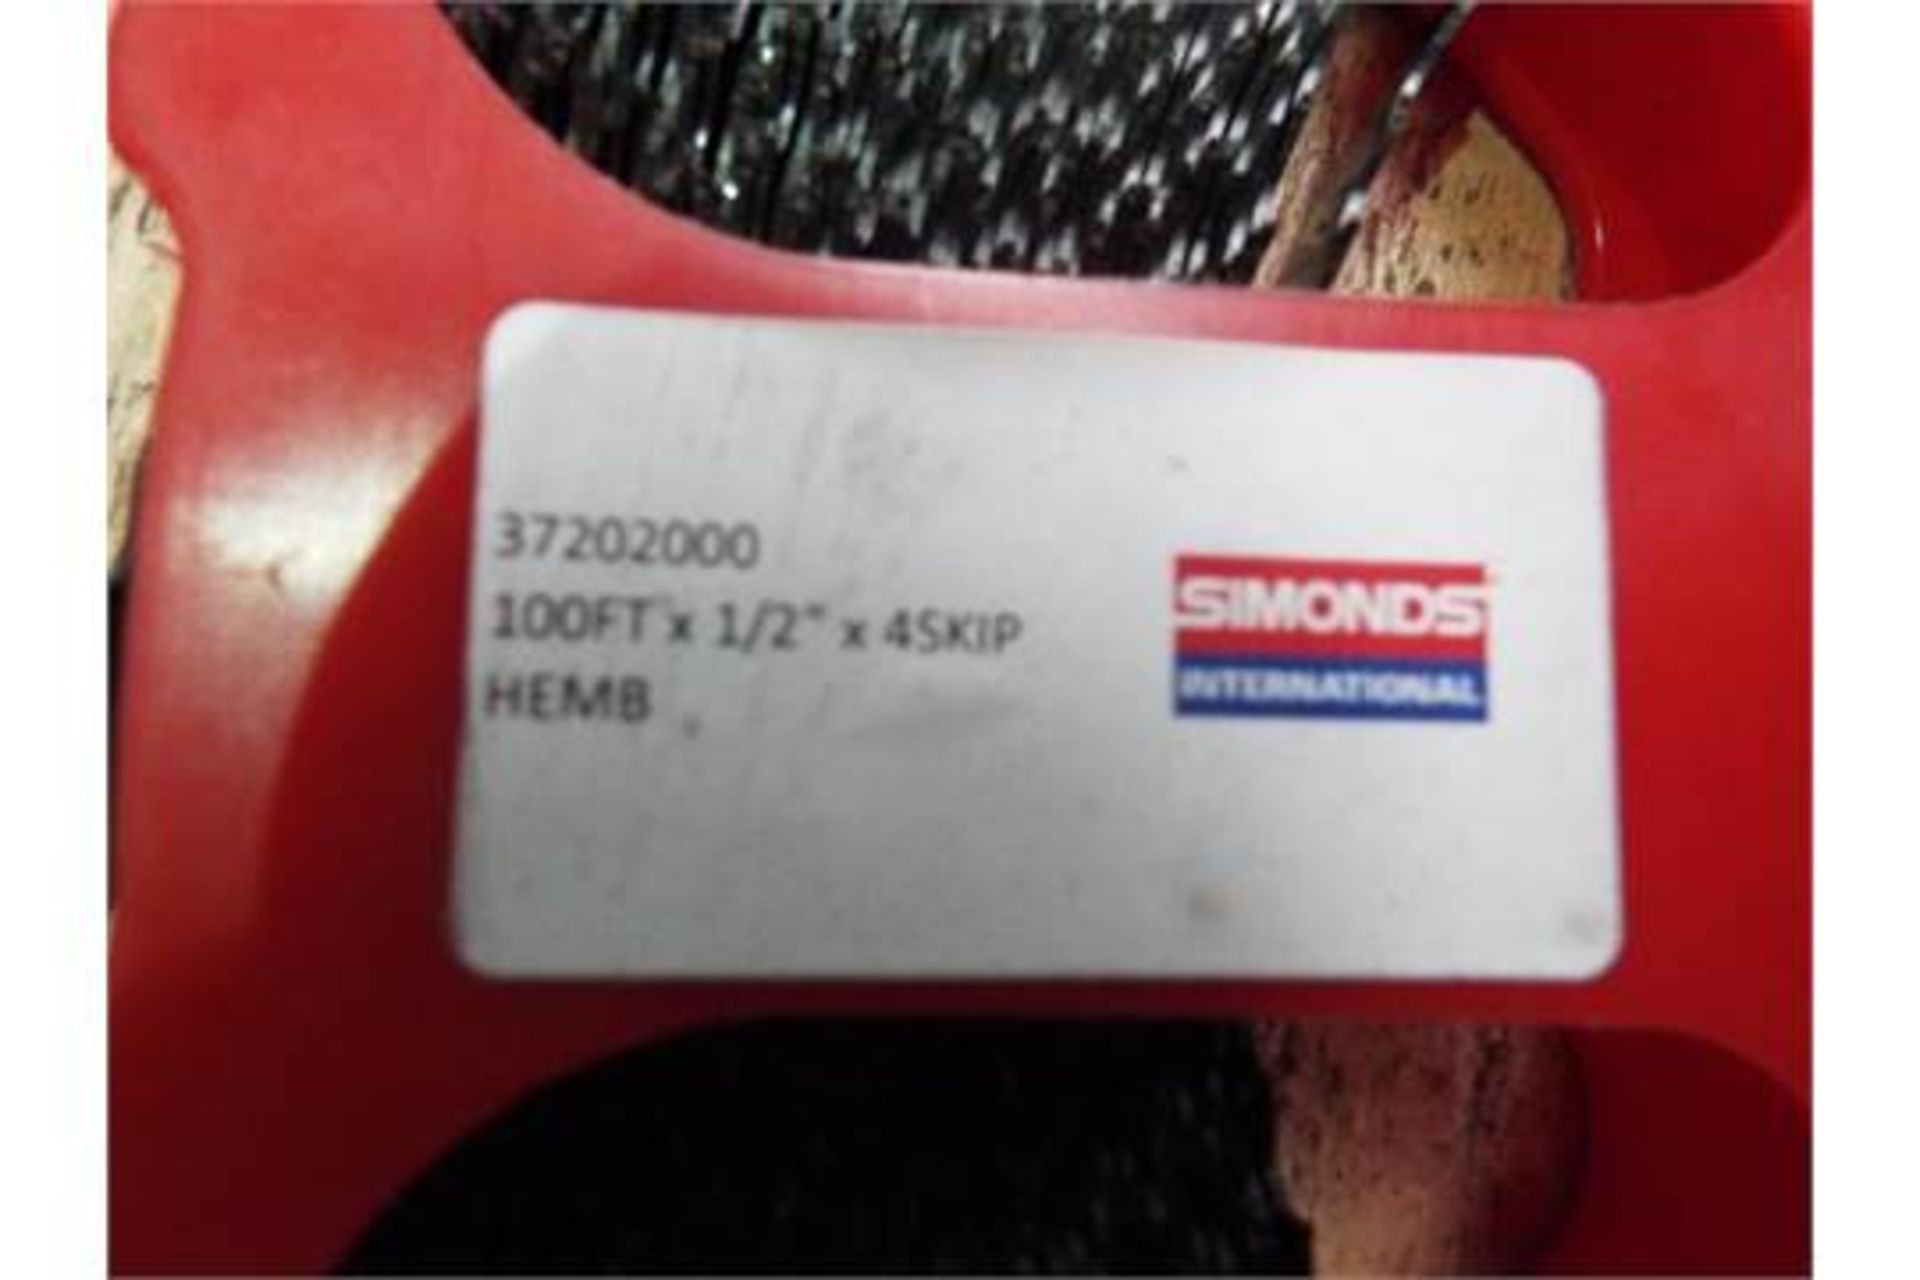 10 x Simmonds 100ft 1/2" x 4 Skip Band Saw Blade Coils - Image 4 of 4